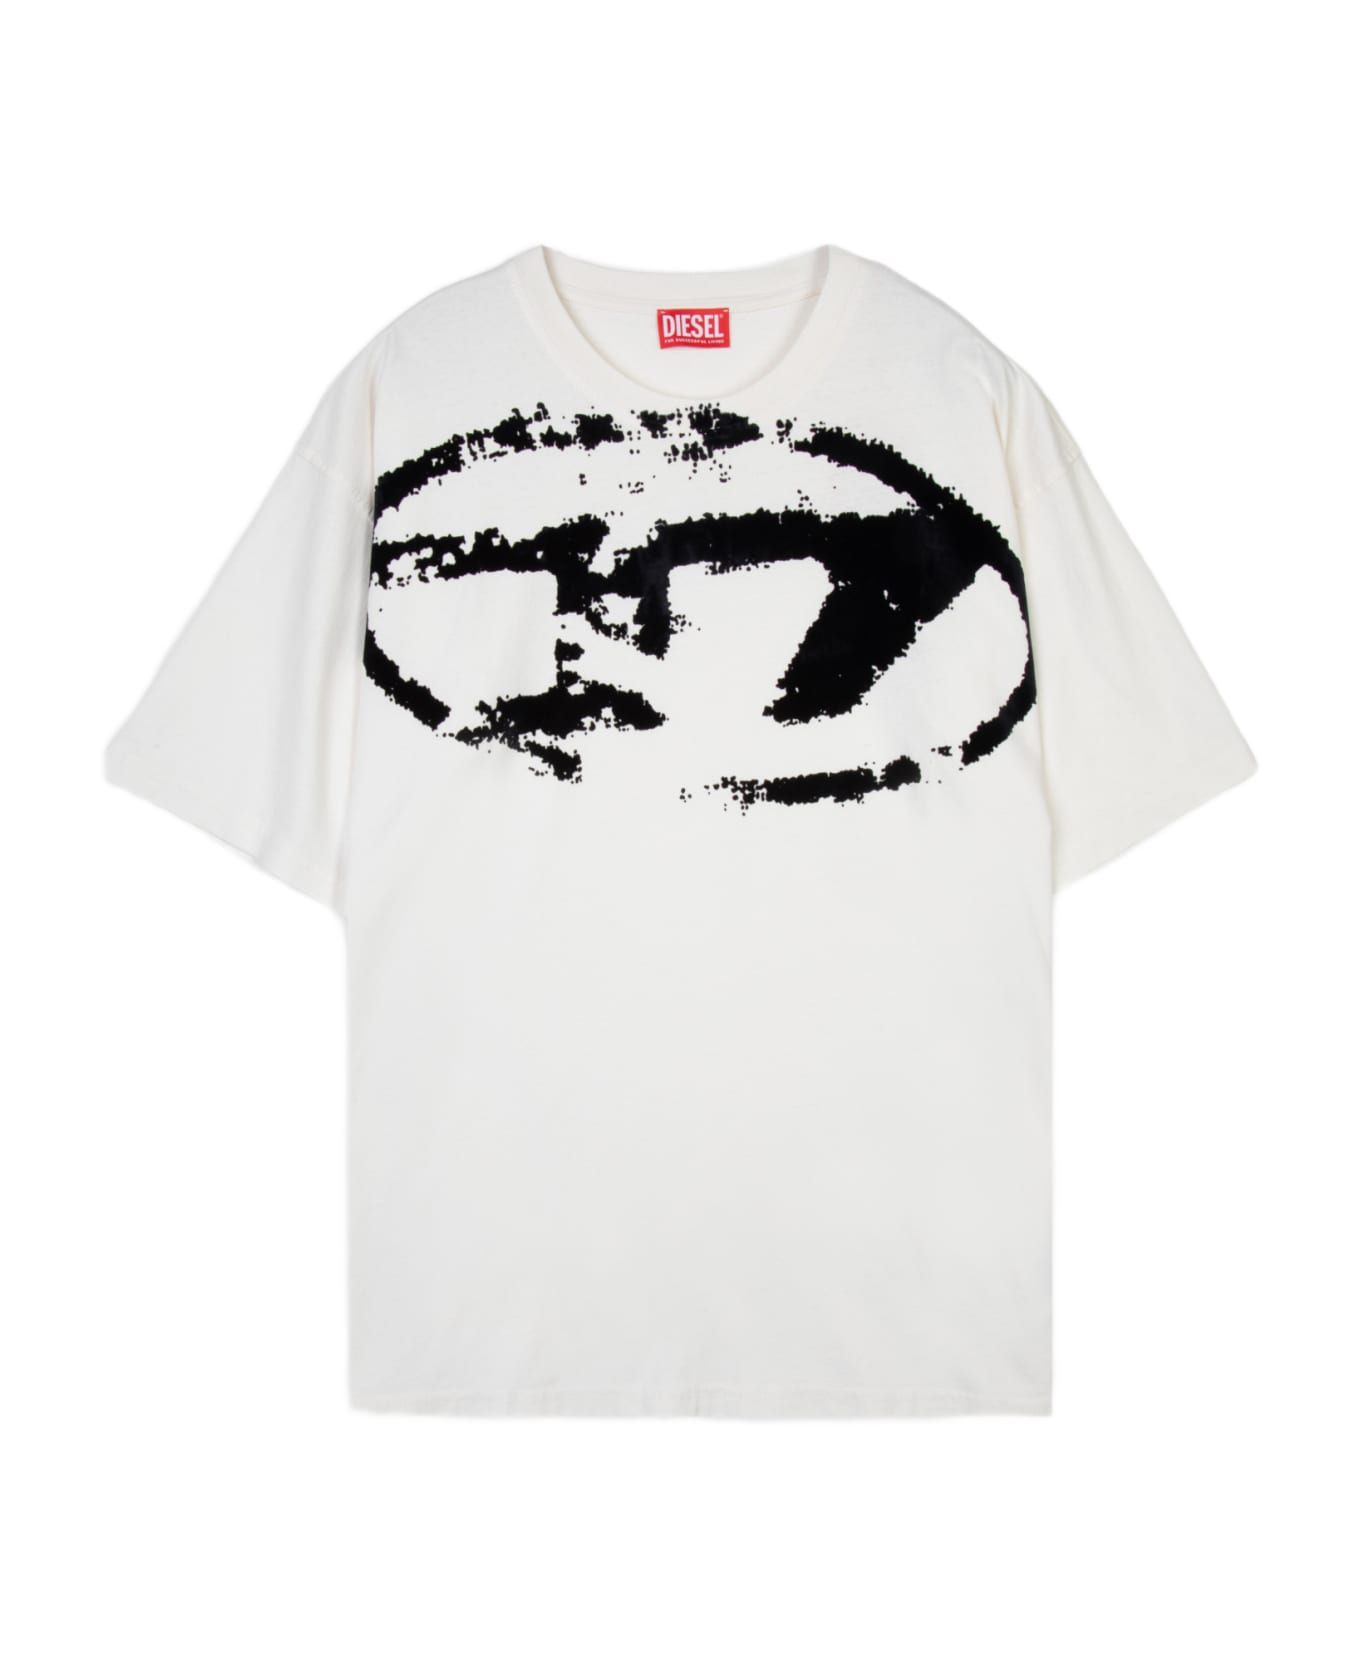 Diesel T-boxt-n14 Off white cotton t-shirt with flock logo print - T Boxt N14 - Panna/nero